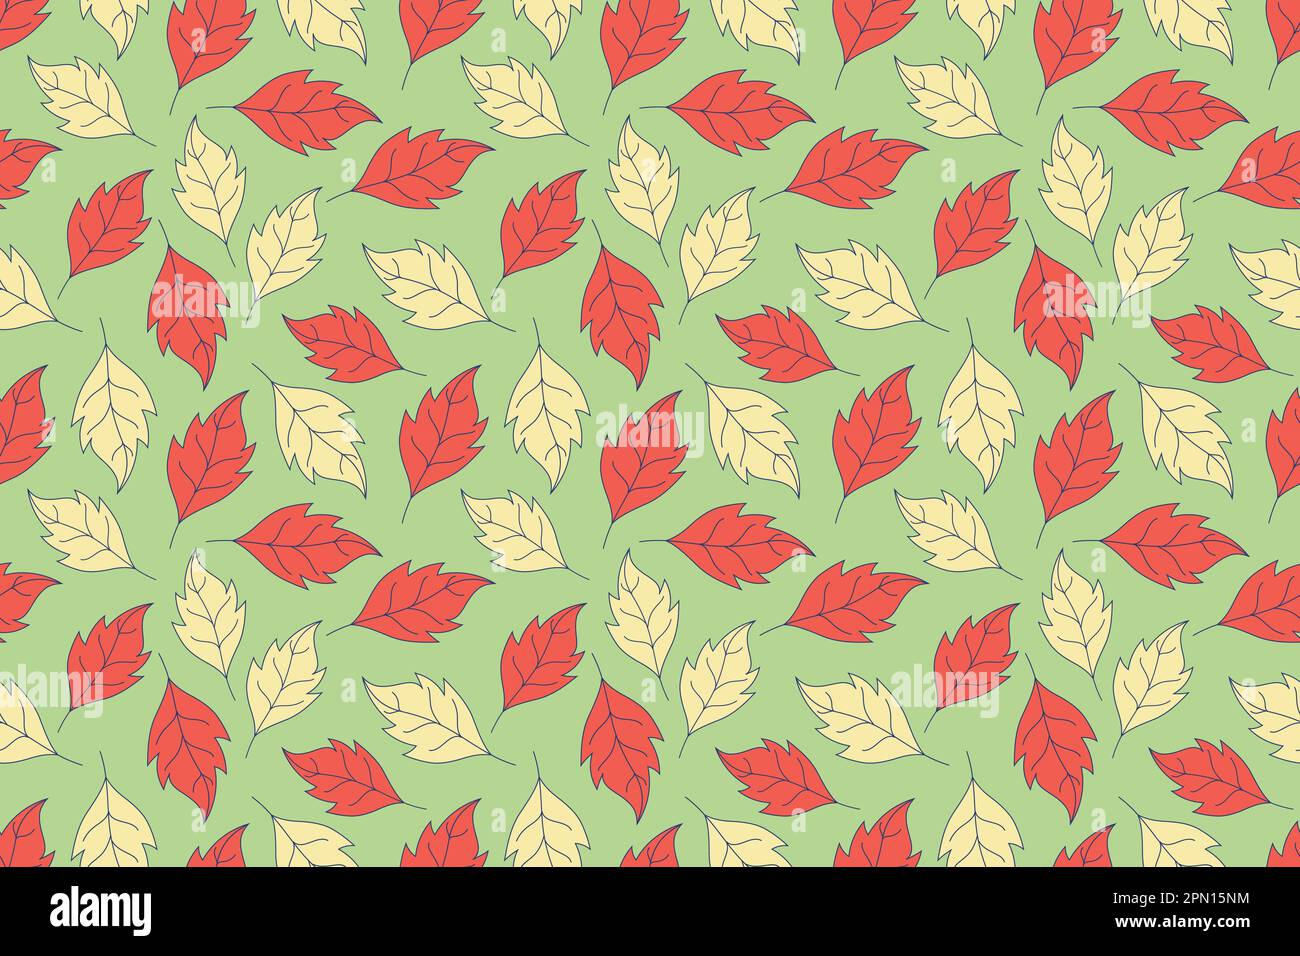 Seamless red and yellow pattern with flowers on green background. Hand drawn vector illustration. Simple colored autumnal doodles for fashion design and fabric background. Stock Vector